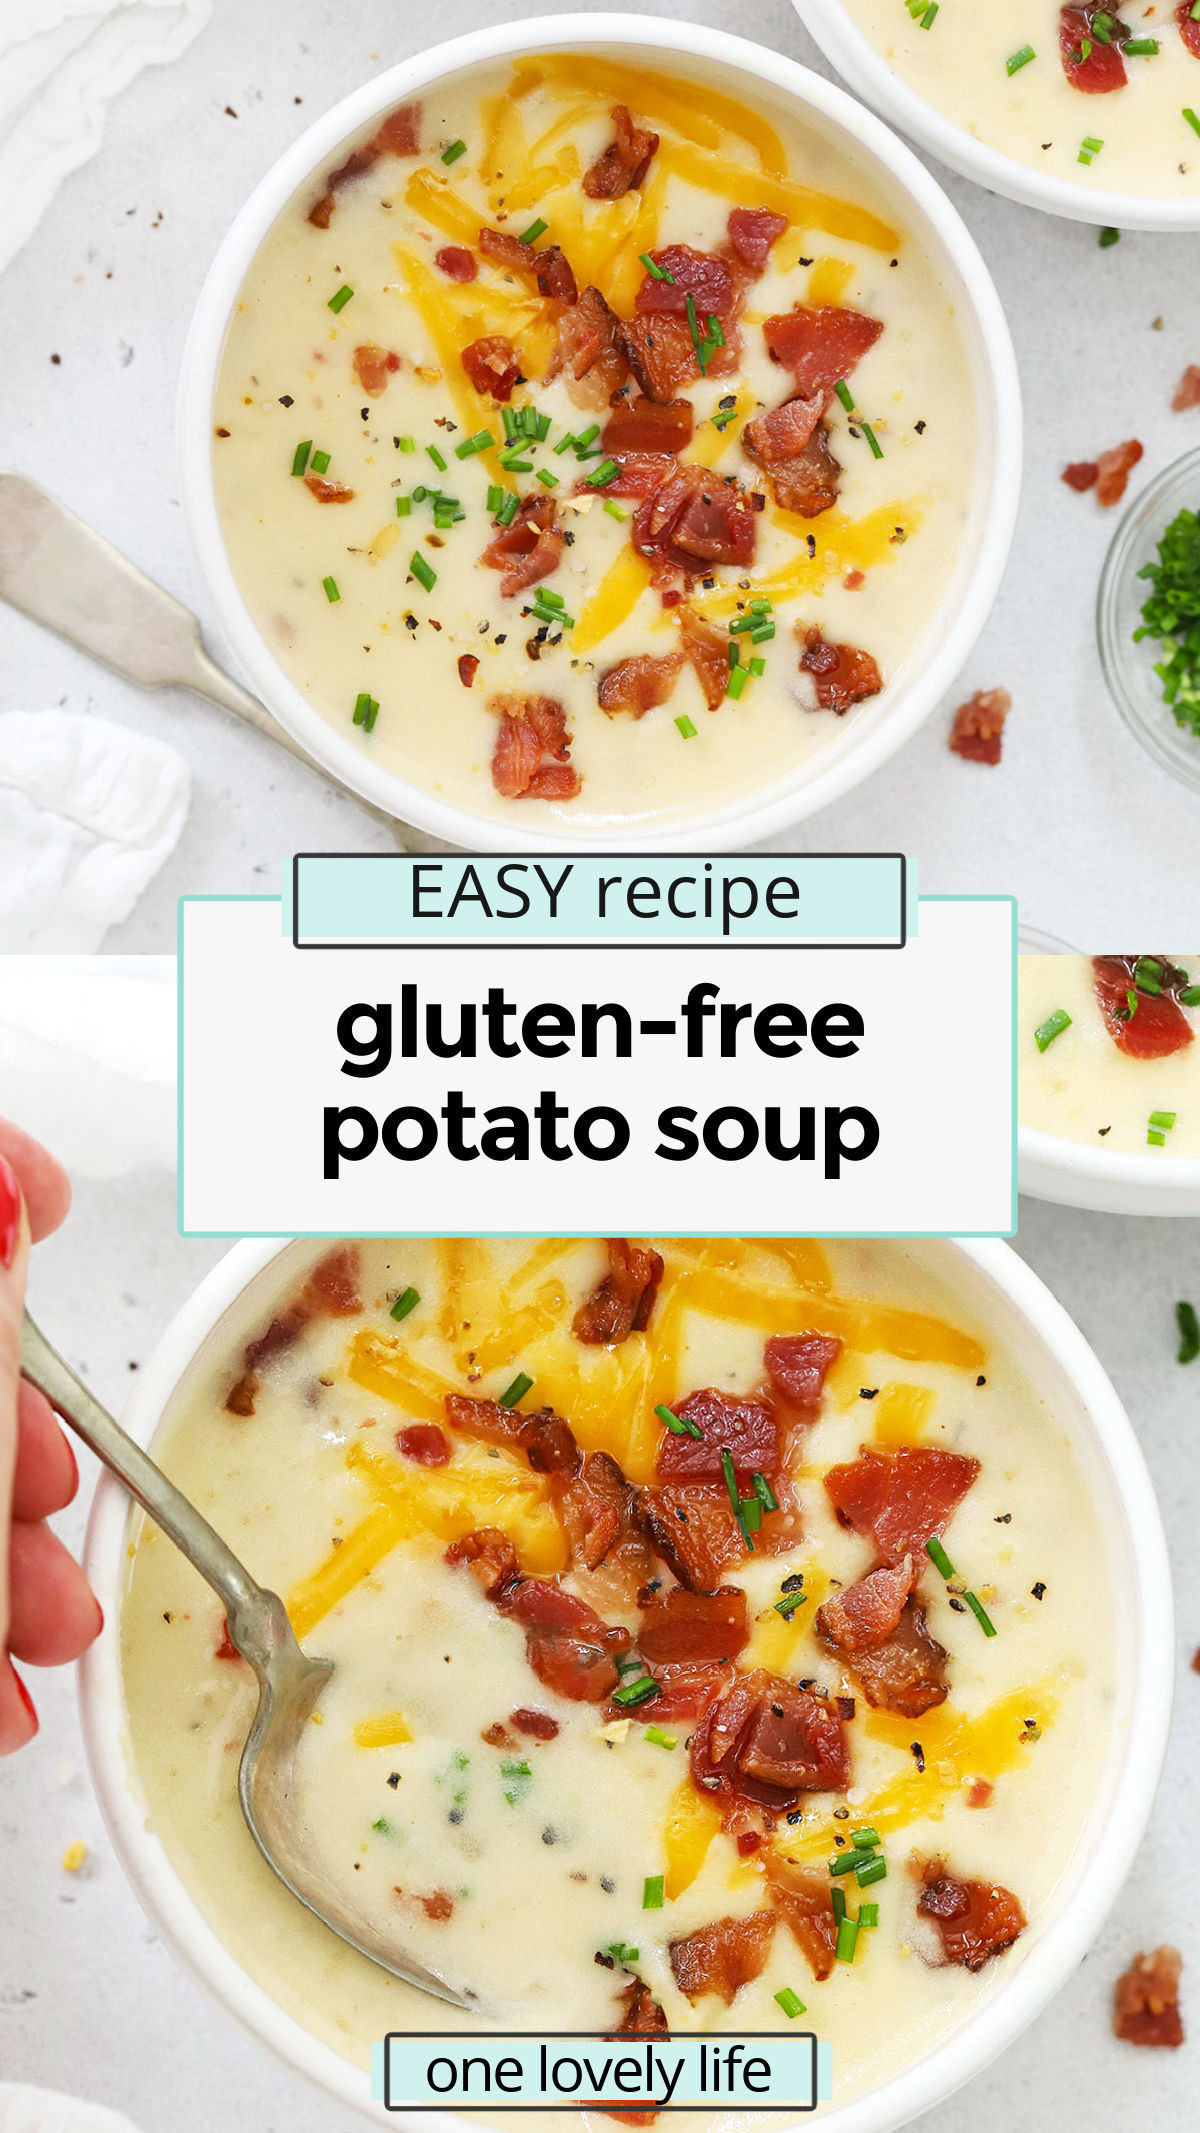 Our Gluten-Free Potato Soup recipe feels like a loaded baked potato! It's creamy, filling, and topped with goodies. It's perfect for a chilly night! // gluten free soup recipe / gluten free loaded baked potato soup / gluten free baked potato soup recipe / gluten free comfort food / the best potato soup recipe / best gluten-free potato soup recipe /